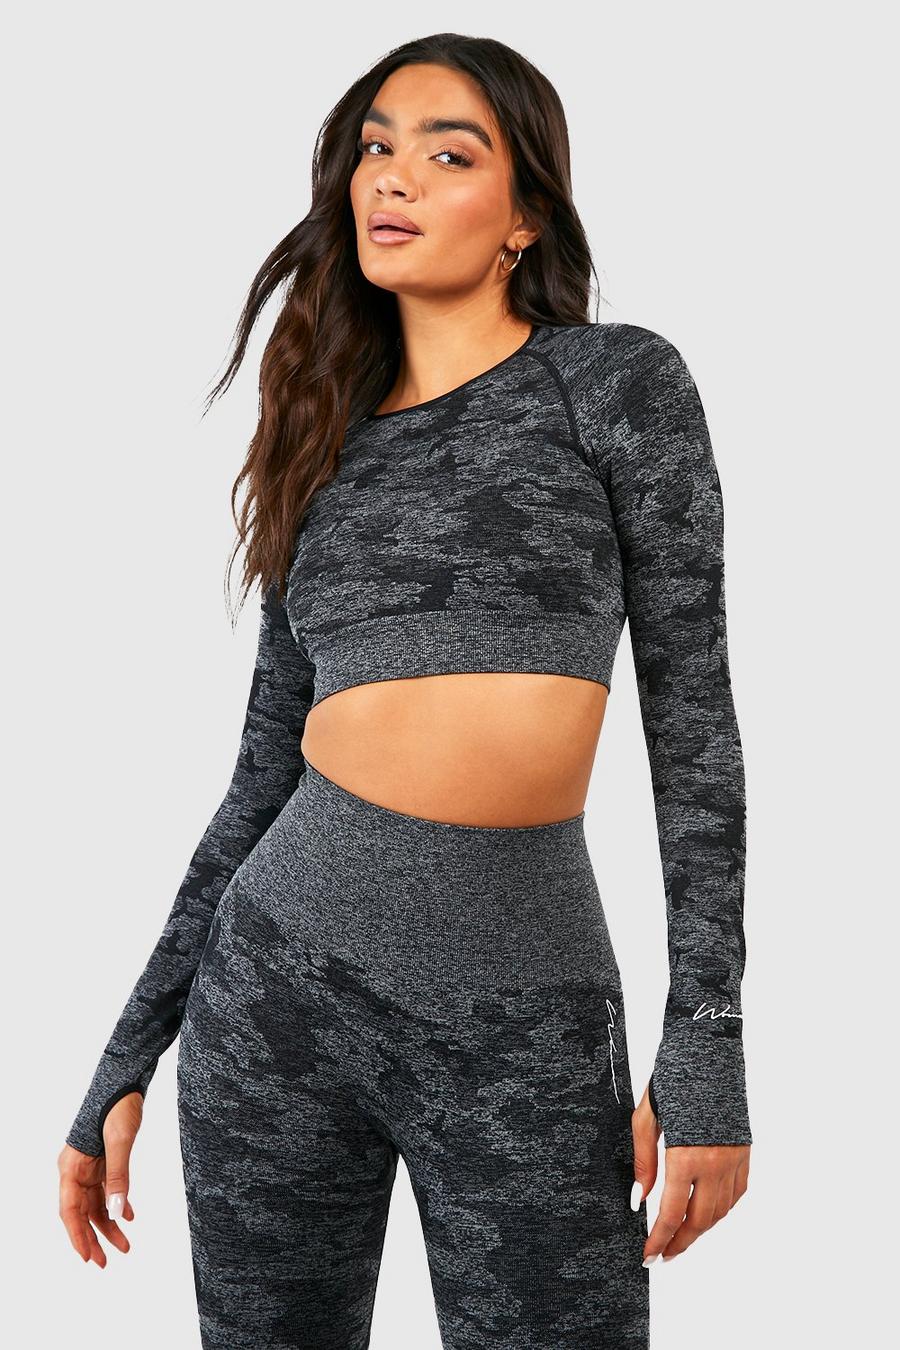 Black Fit Camo Contouring Long Sleeve Crop Top image number 1